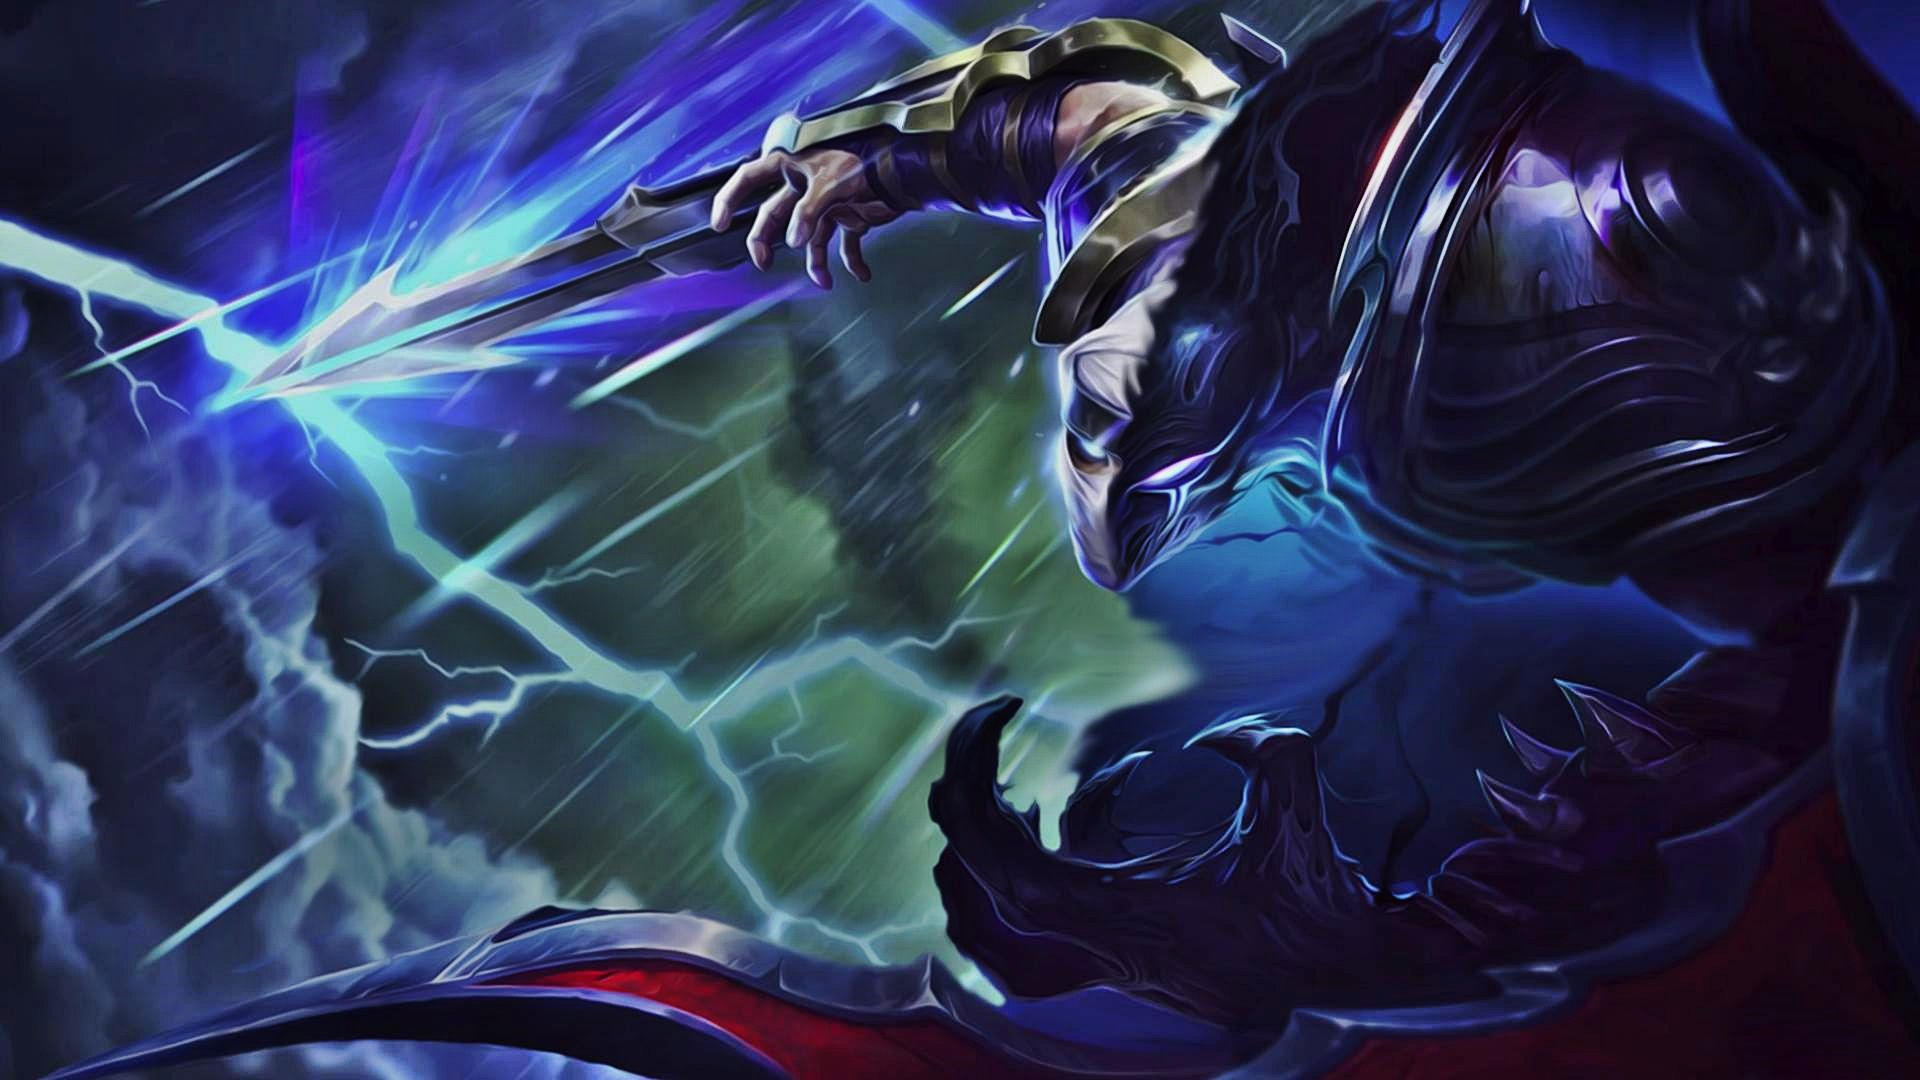 1920x1080 The truth about Zed and Nocturne : leagueoflegends | League of legends, Nocturne, Fantasy creatures